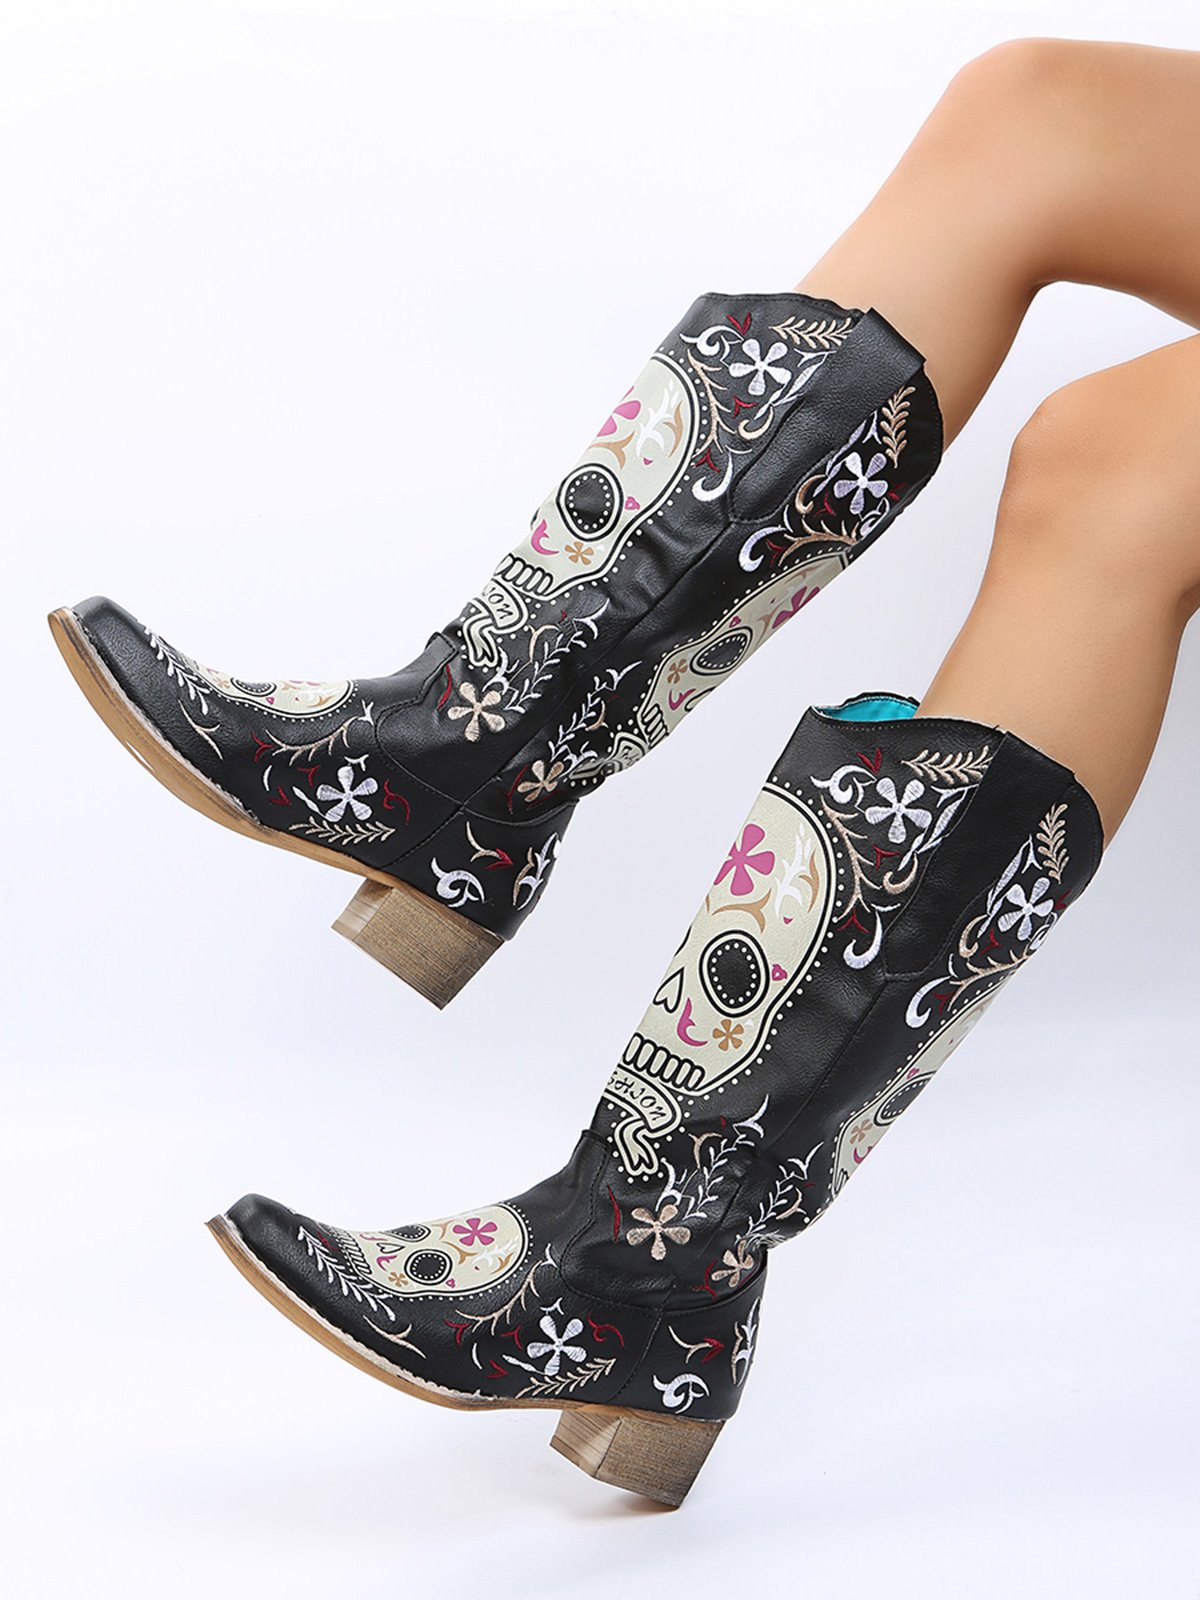 Pu Leather Cowboy Boot